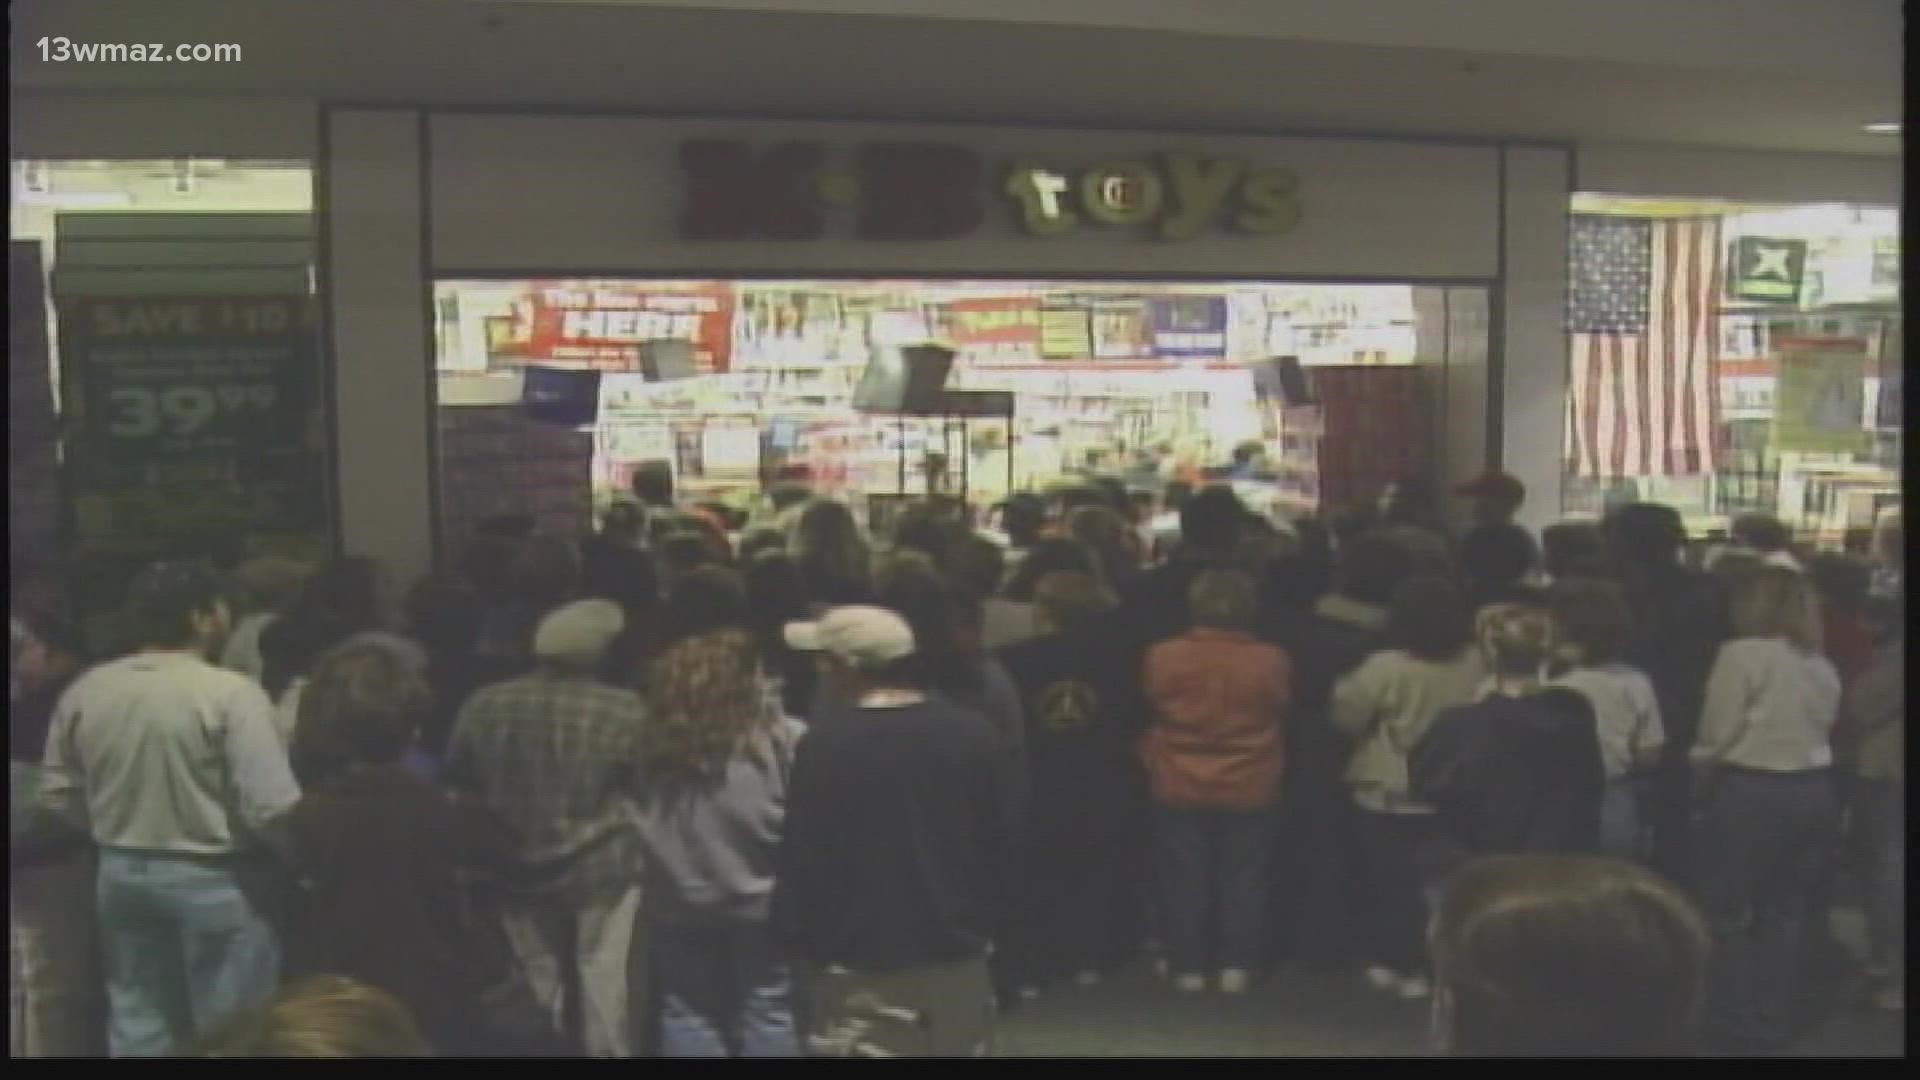 While Black Friday shopping is still big, it’s nothing like the crazed shopping frenzy it once was.